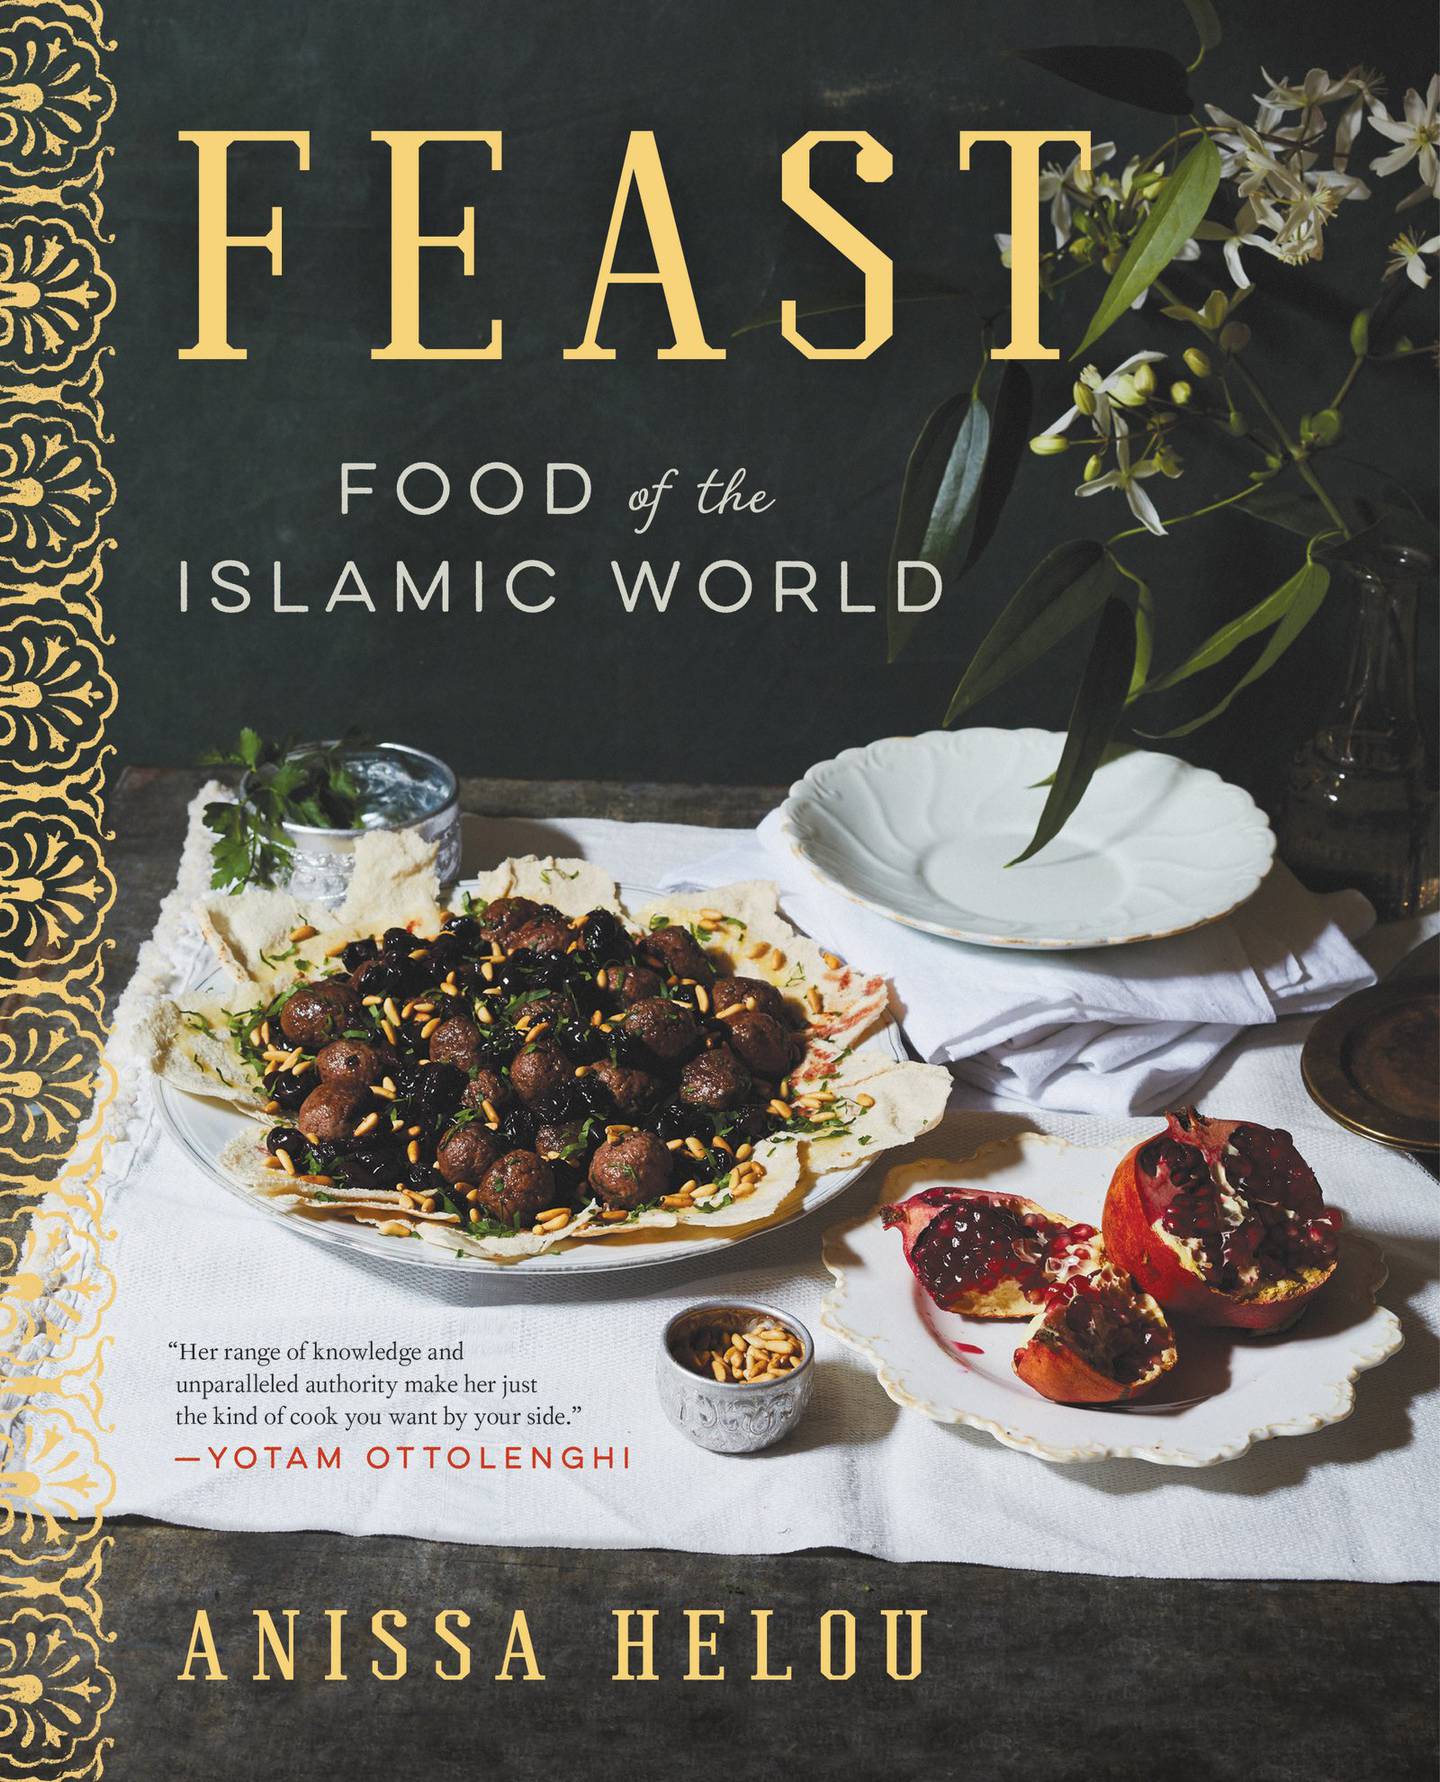 Feast: Food of the Islamic World by Anissa Helou published by Ecco. Courtesy HarperCollins